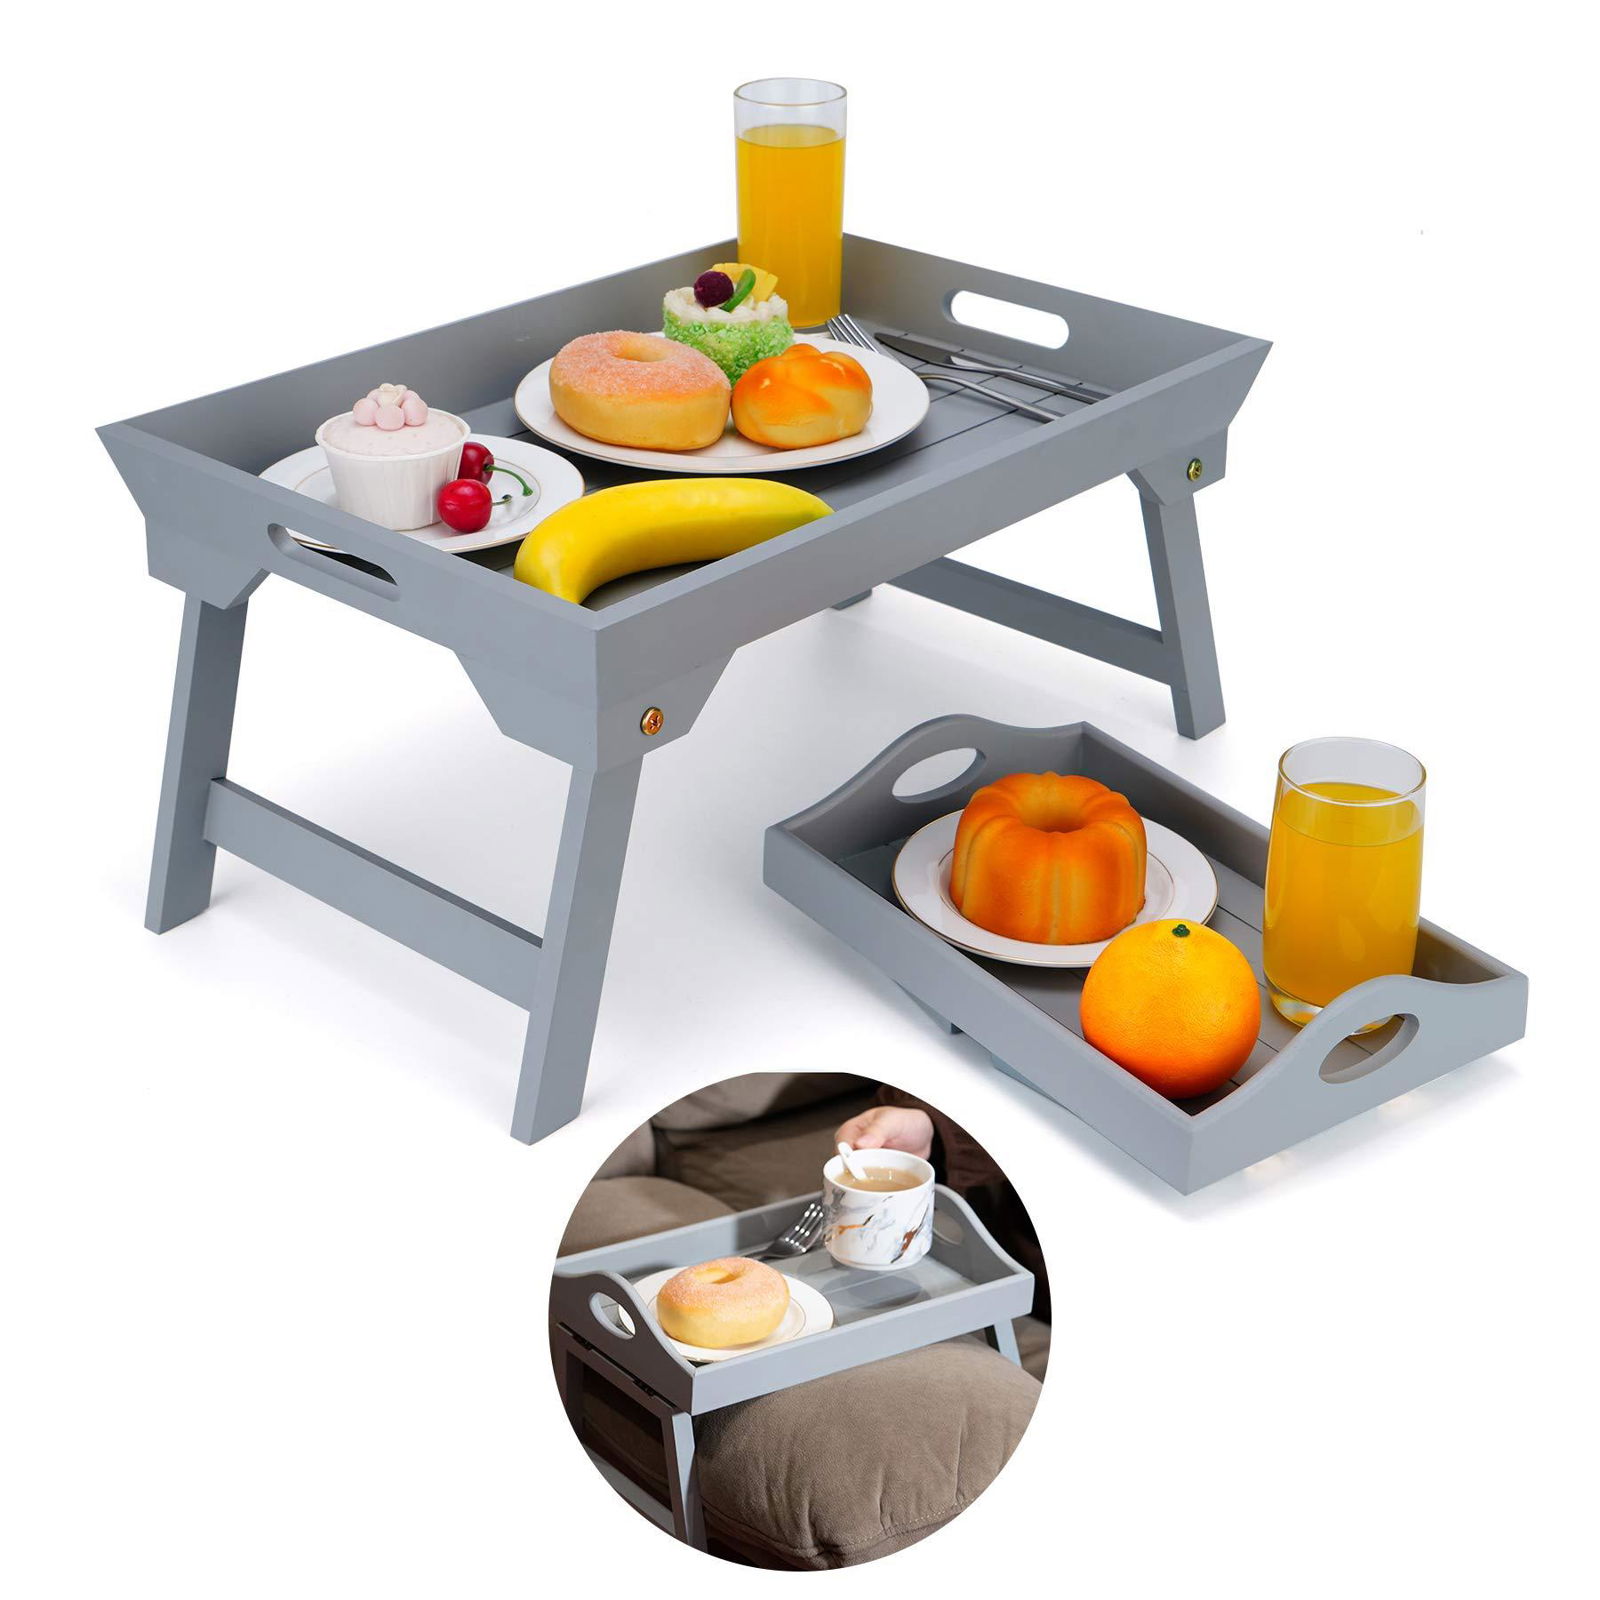 2 PACKS BRAKFAST TRAYS TABLE, WOODEN BED TRAY AND SOFA ARMREST TRAY TABLE SERVIN